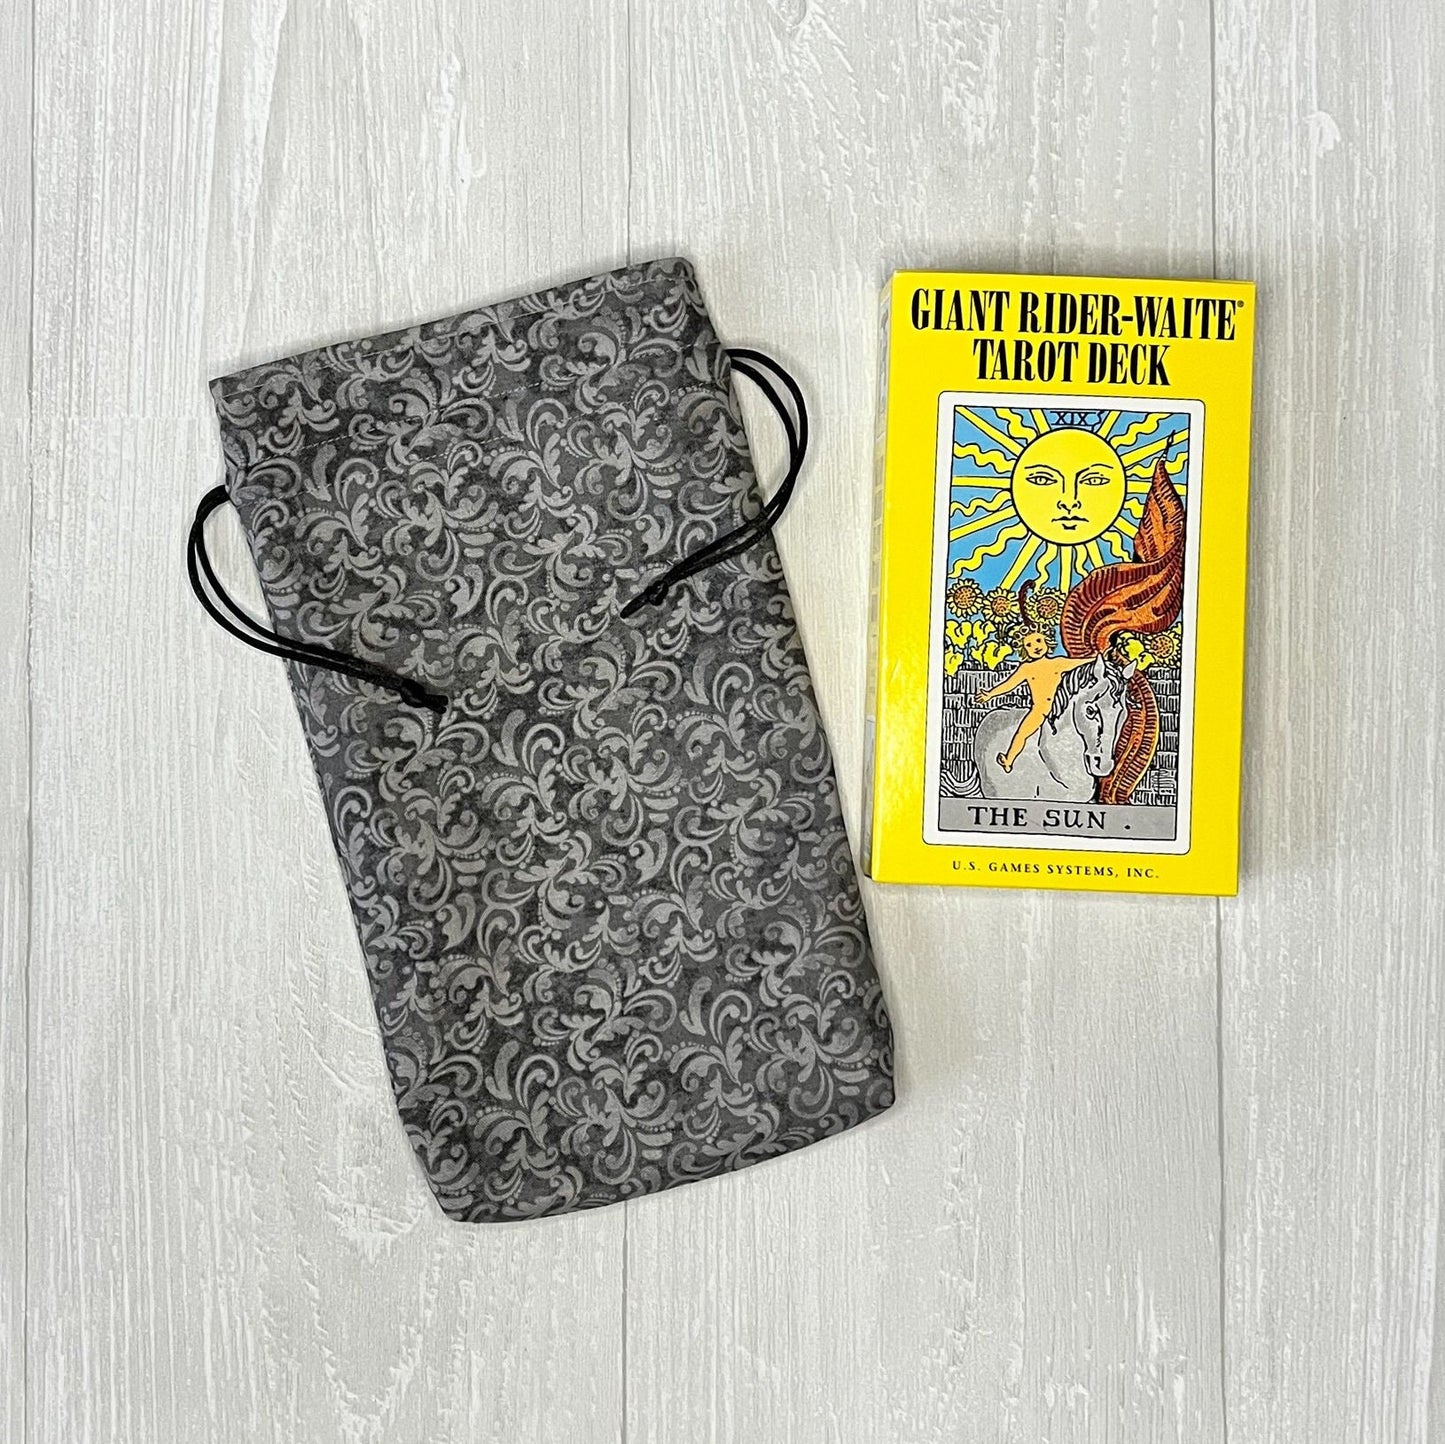 Large Gray Tarot Deck Bag, Oracle Card Drawstring Pouch, Deck Storage Holder, Pagan Witchcraft Wiccan Divination Tools Gifts & Supplies